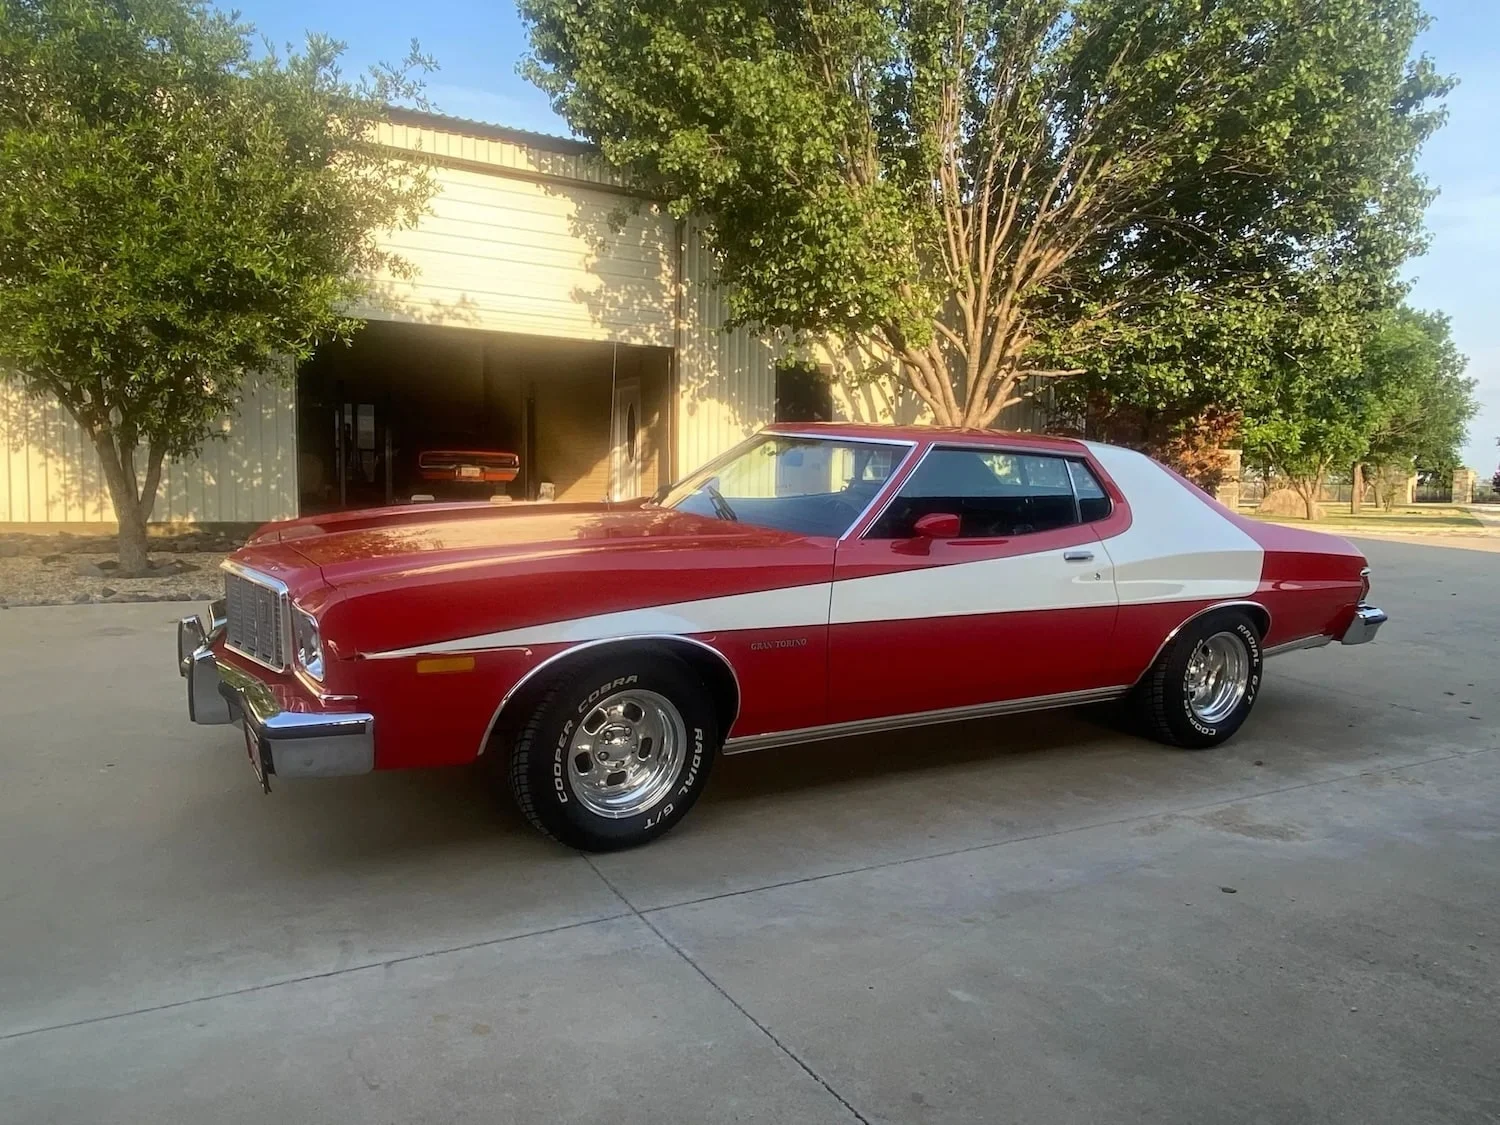 1976 Ford Gran Torino From 'Starsky u0026 Hutch' Up For Auction